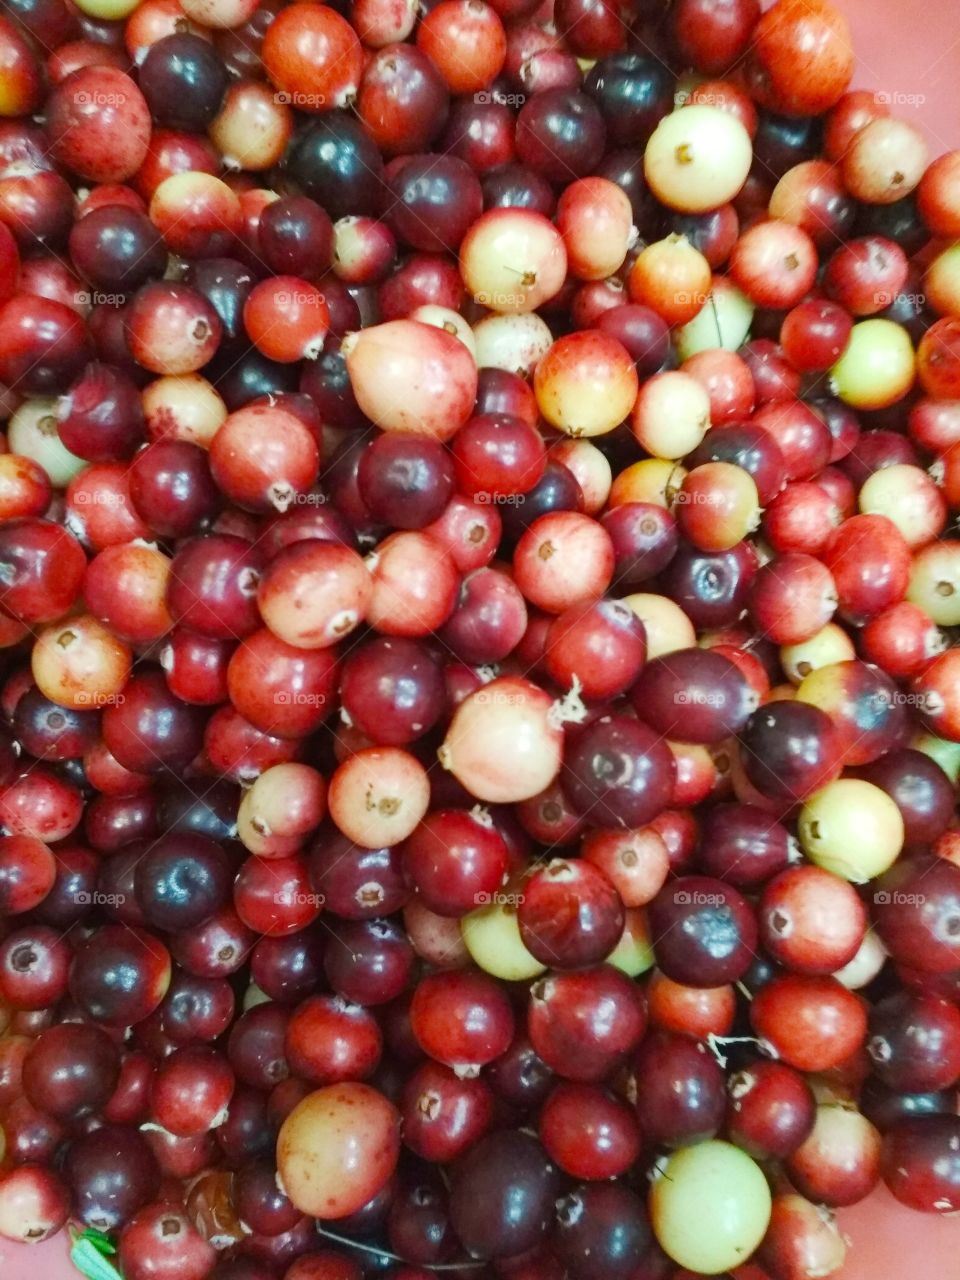 cranberries that grow on a ball